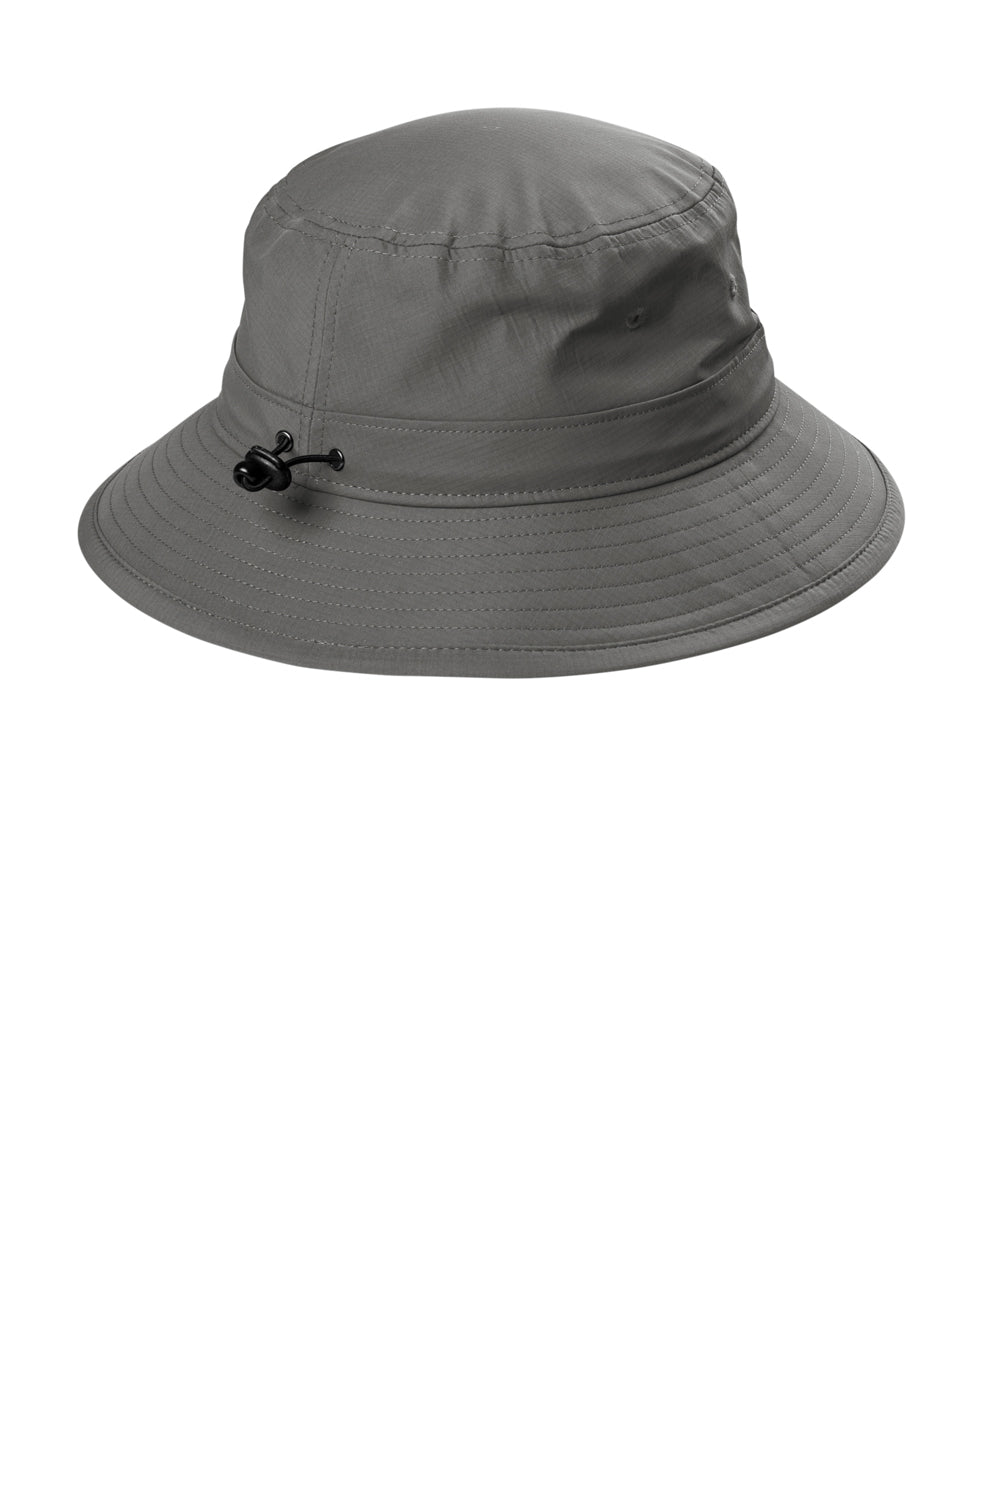 Port Authority C948 Mens Moisture Wicking Bucket Hat Sterling Grey Back